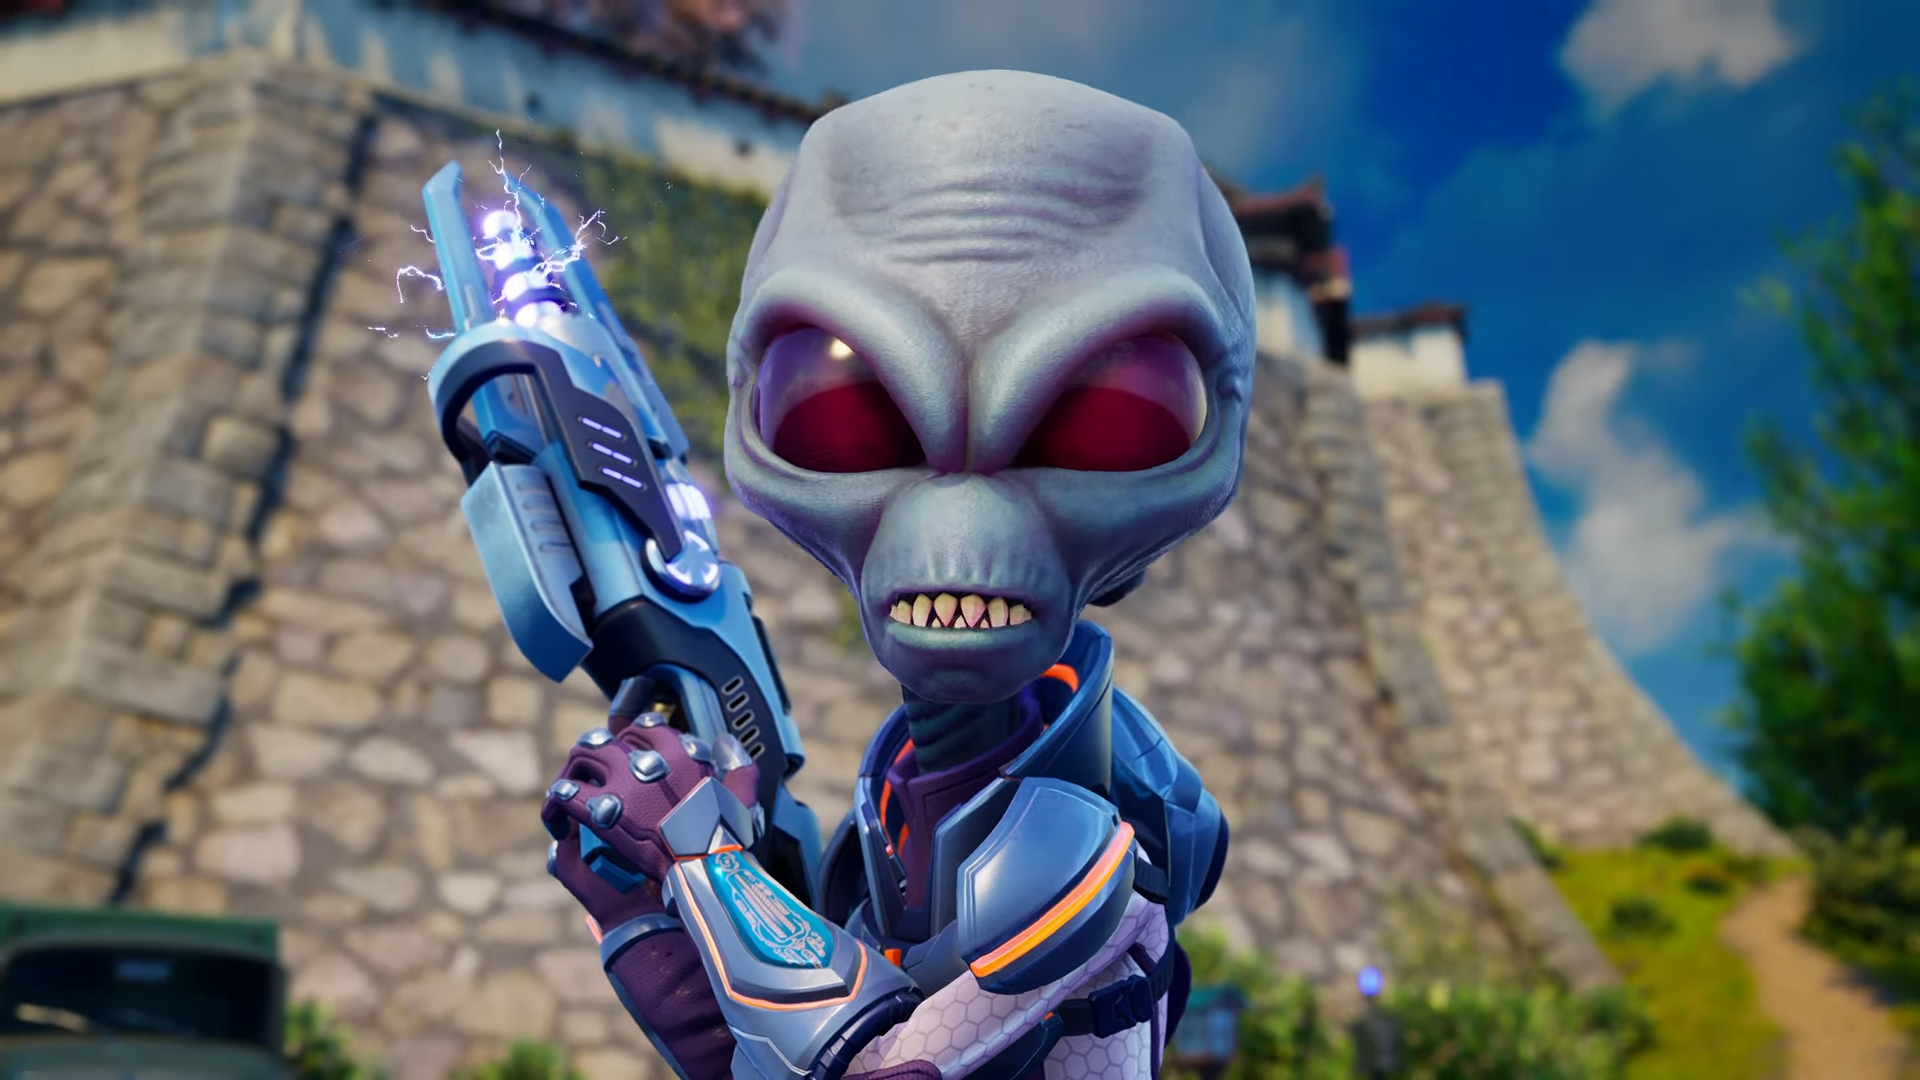 Destroy all Humans 2 reprobed. Destroy all Humans 2 reprobed 2022. Destroy all Humans! (2020). Destroy all Humans reprobed. Хьюман 2